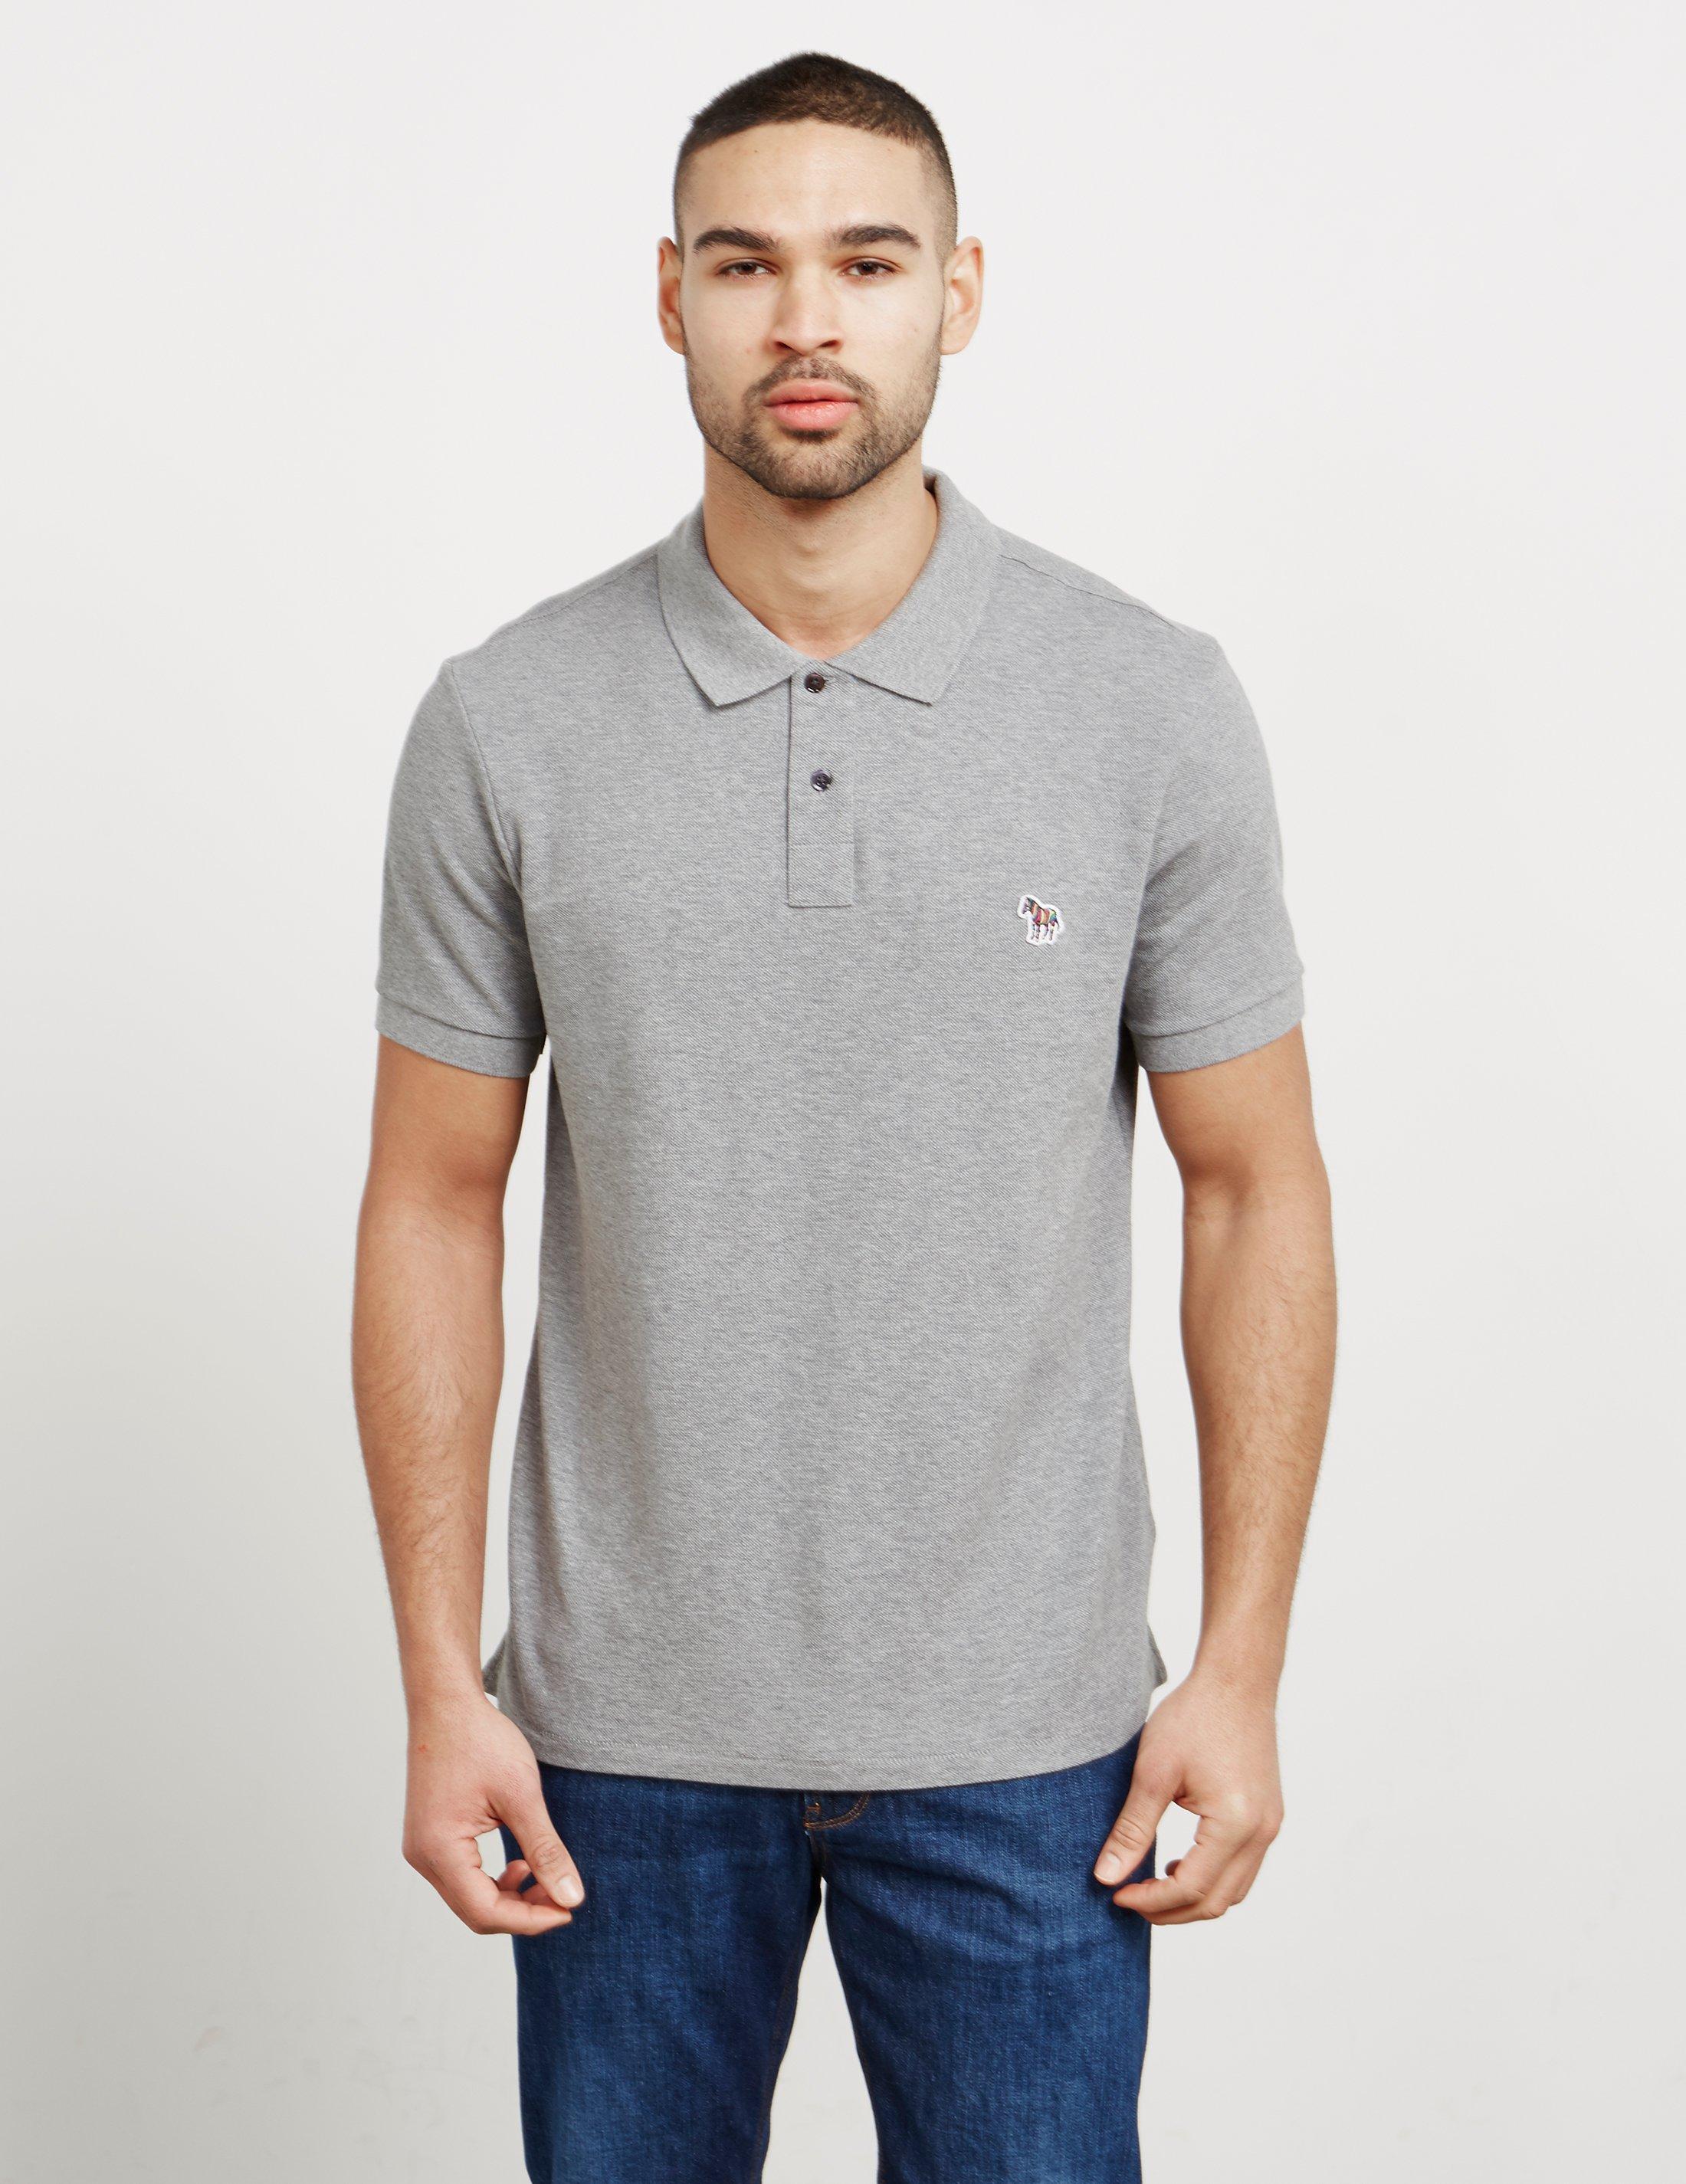 paul smith grey polo shirt > Up to 73% OFF > Free shipping